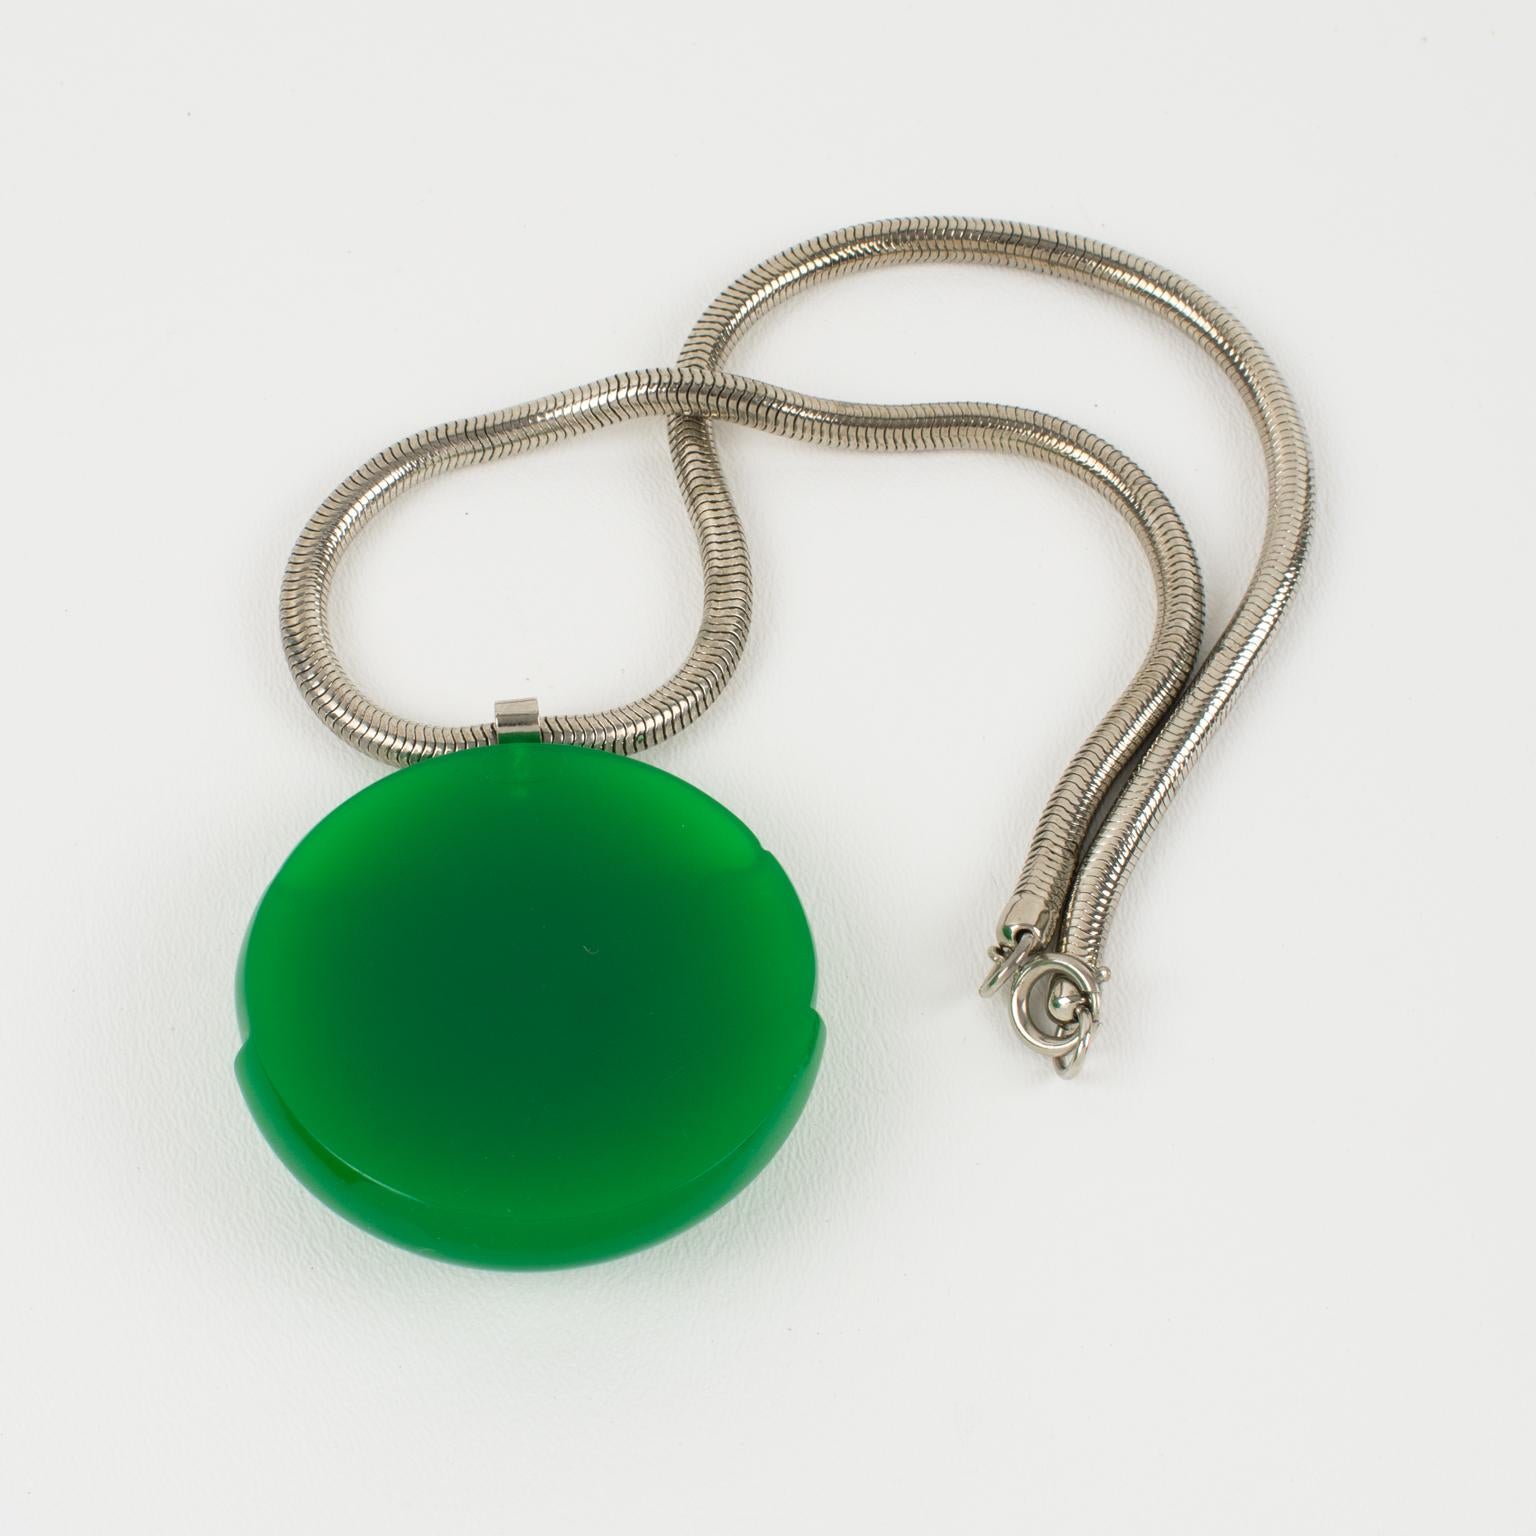 Lanvin Paris Modernist Green Lucite Medallion Necklace with Snake Chain, 1970s For Sale 4